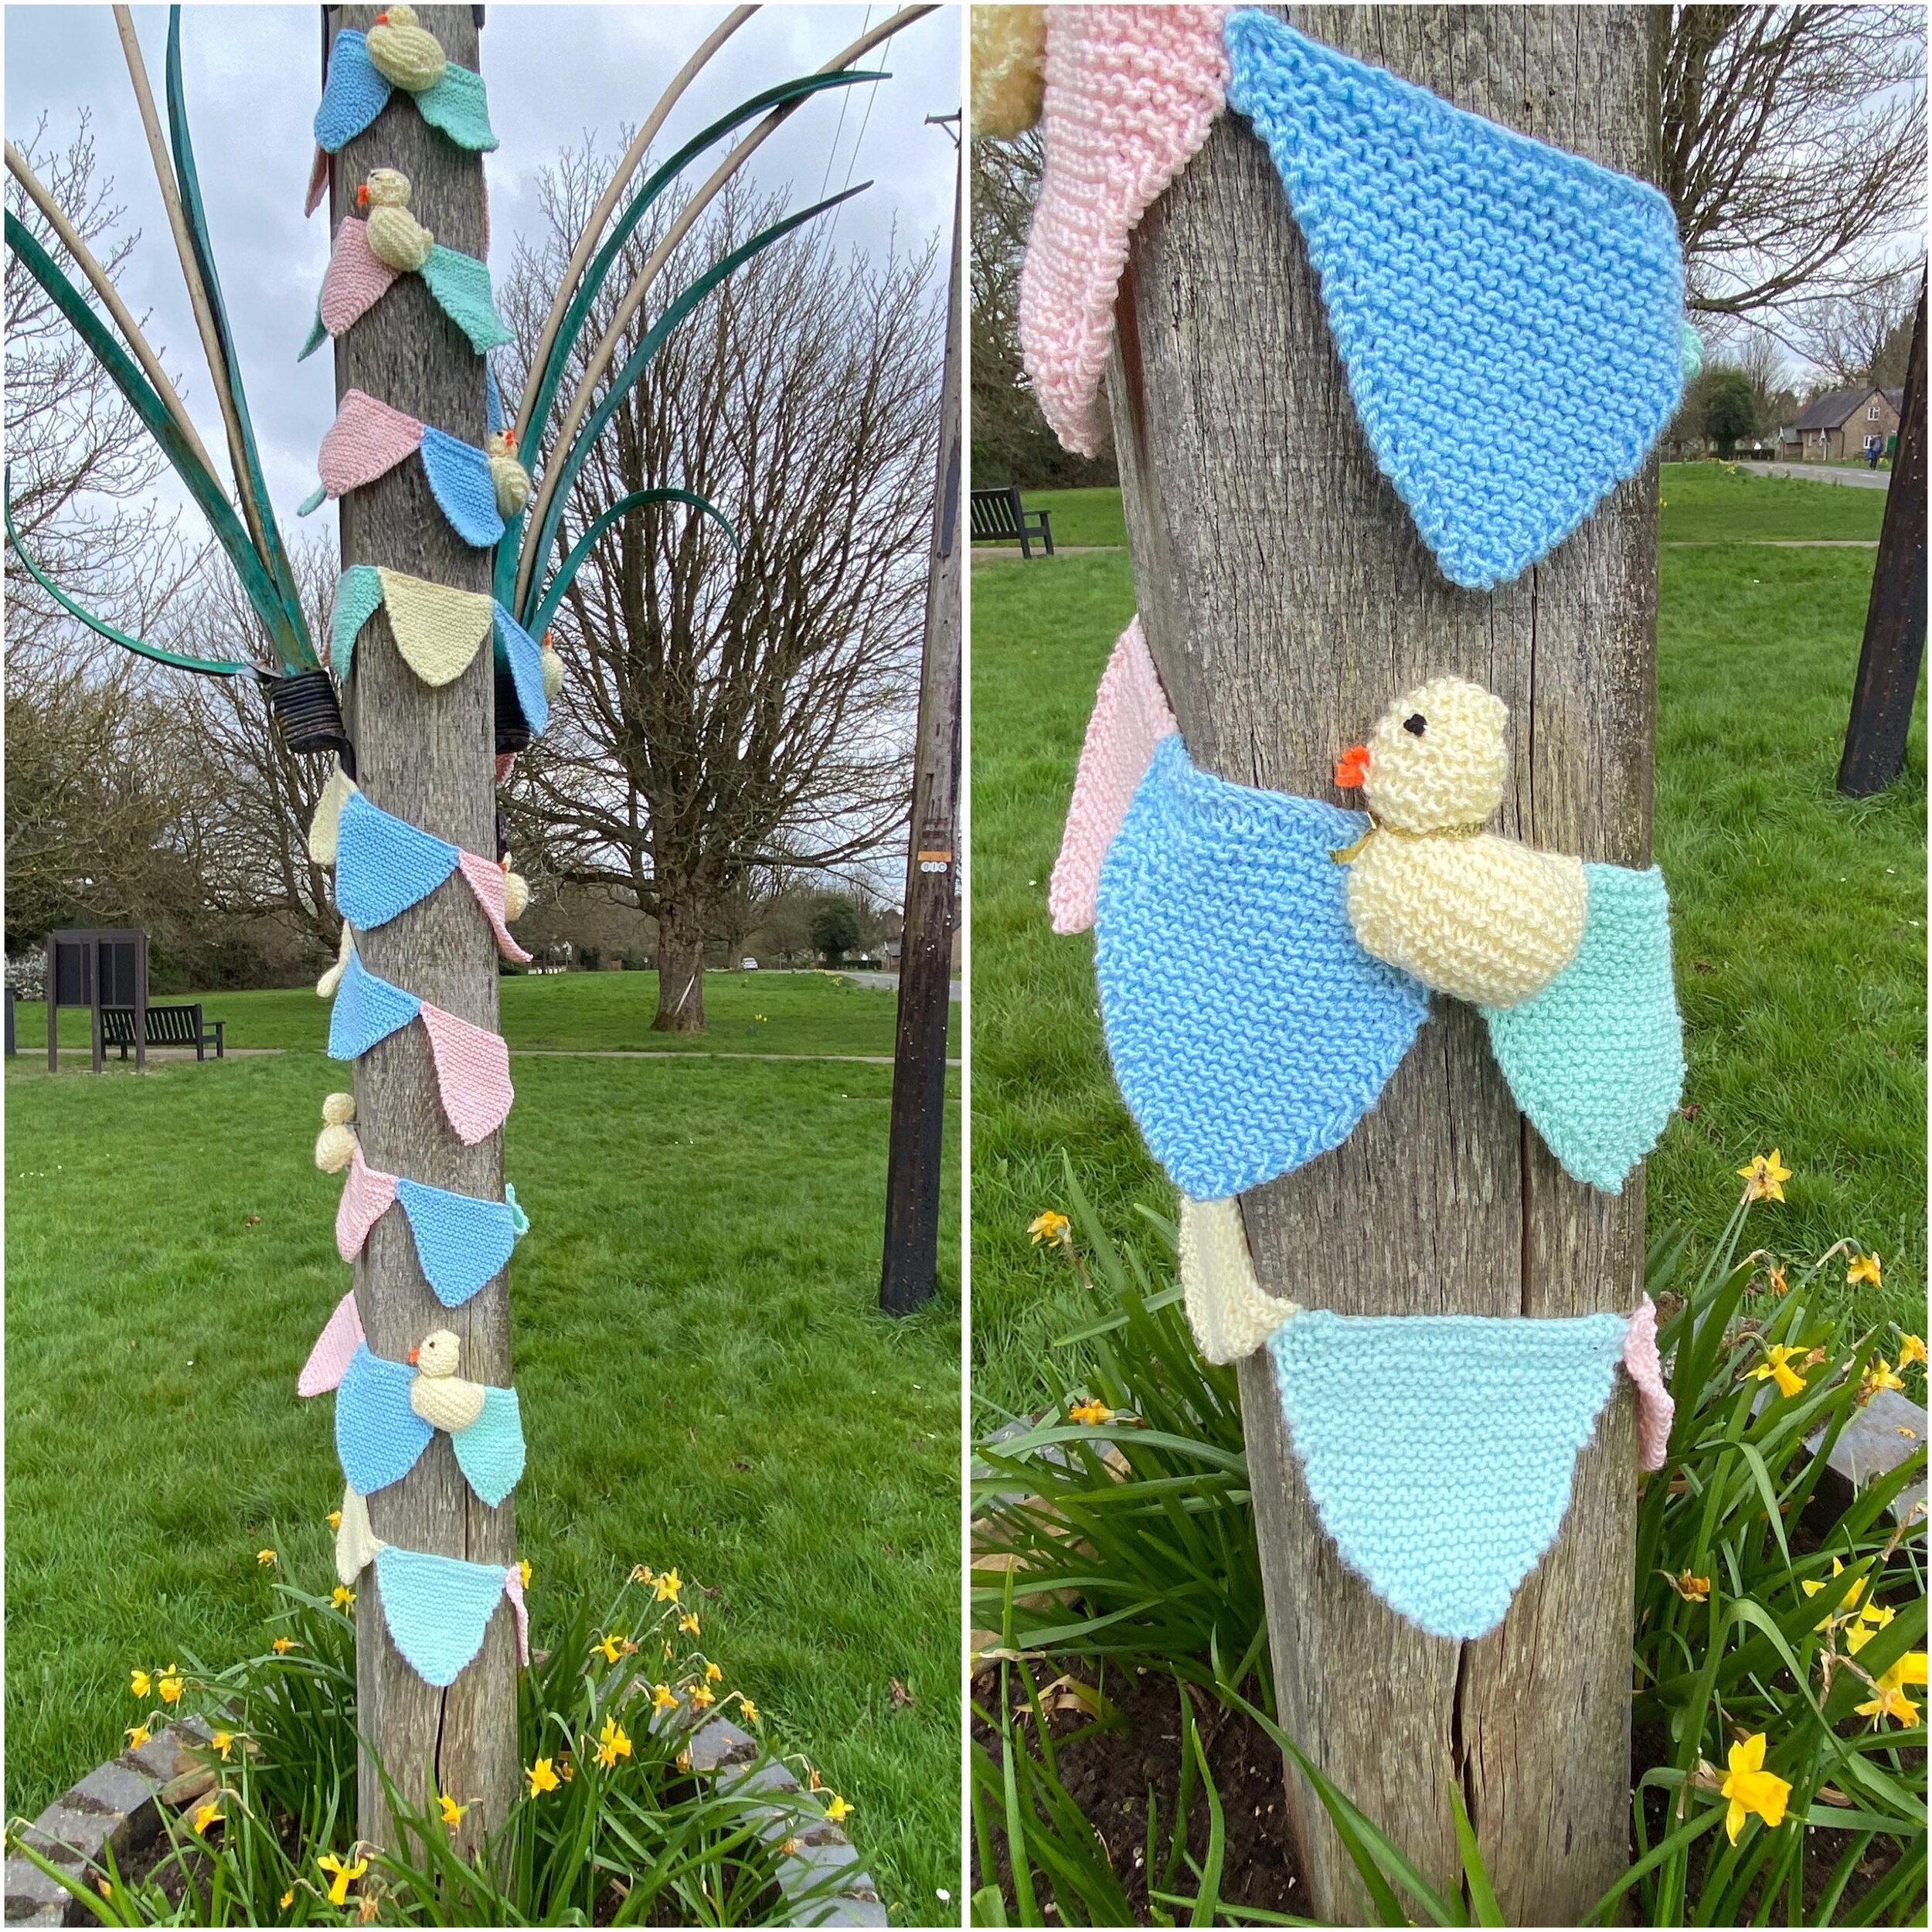 Went for a quick dog walk at lunchtime and came across this&hellip;..spring is in the air 🌷🐣

#vintage #vintageshop #vintagestyle #vintagedecor #spring #springday #yarnbombing